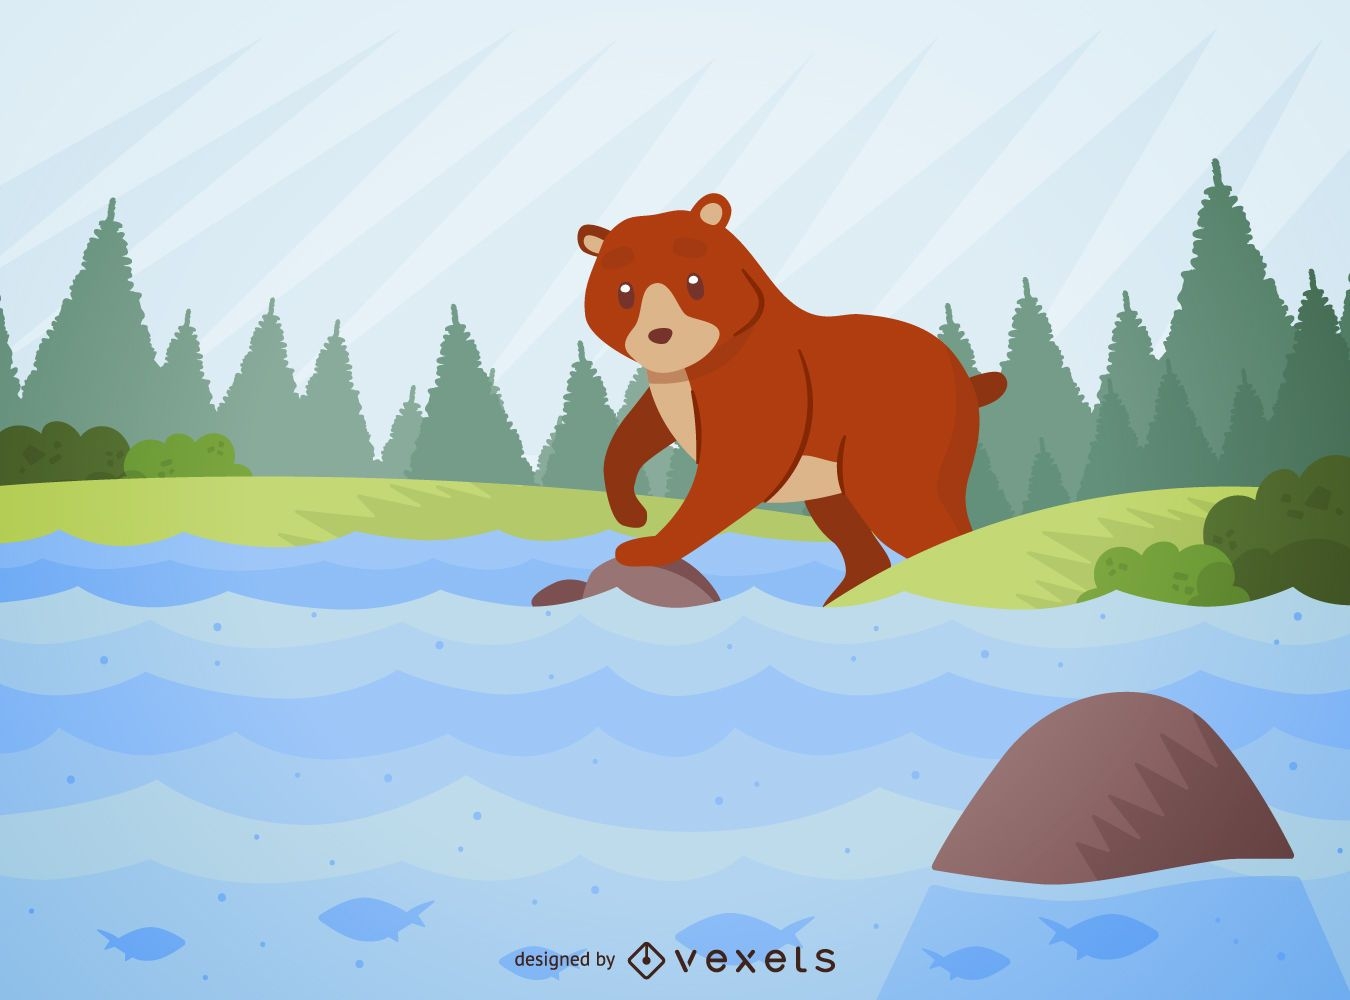 Bear illustration on a river and forest